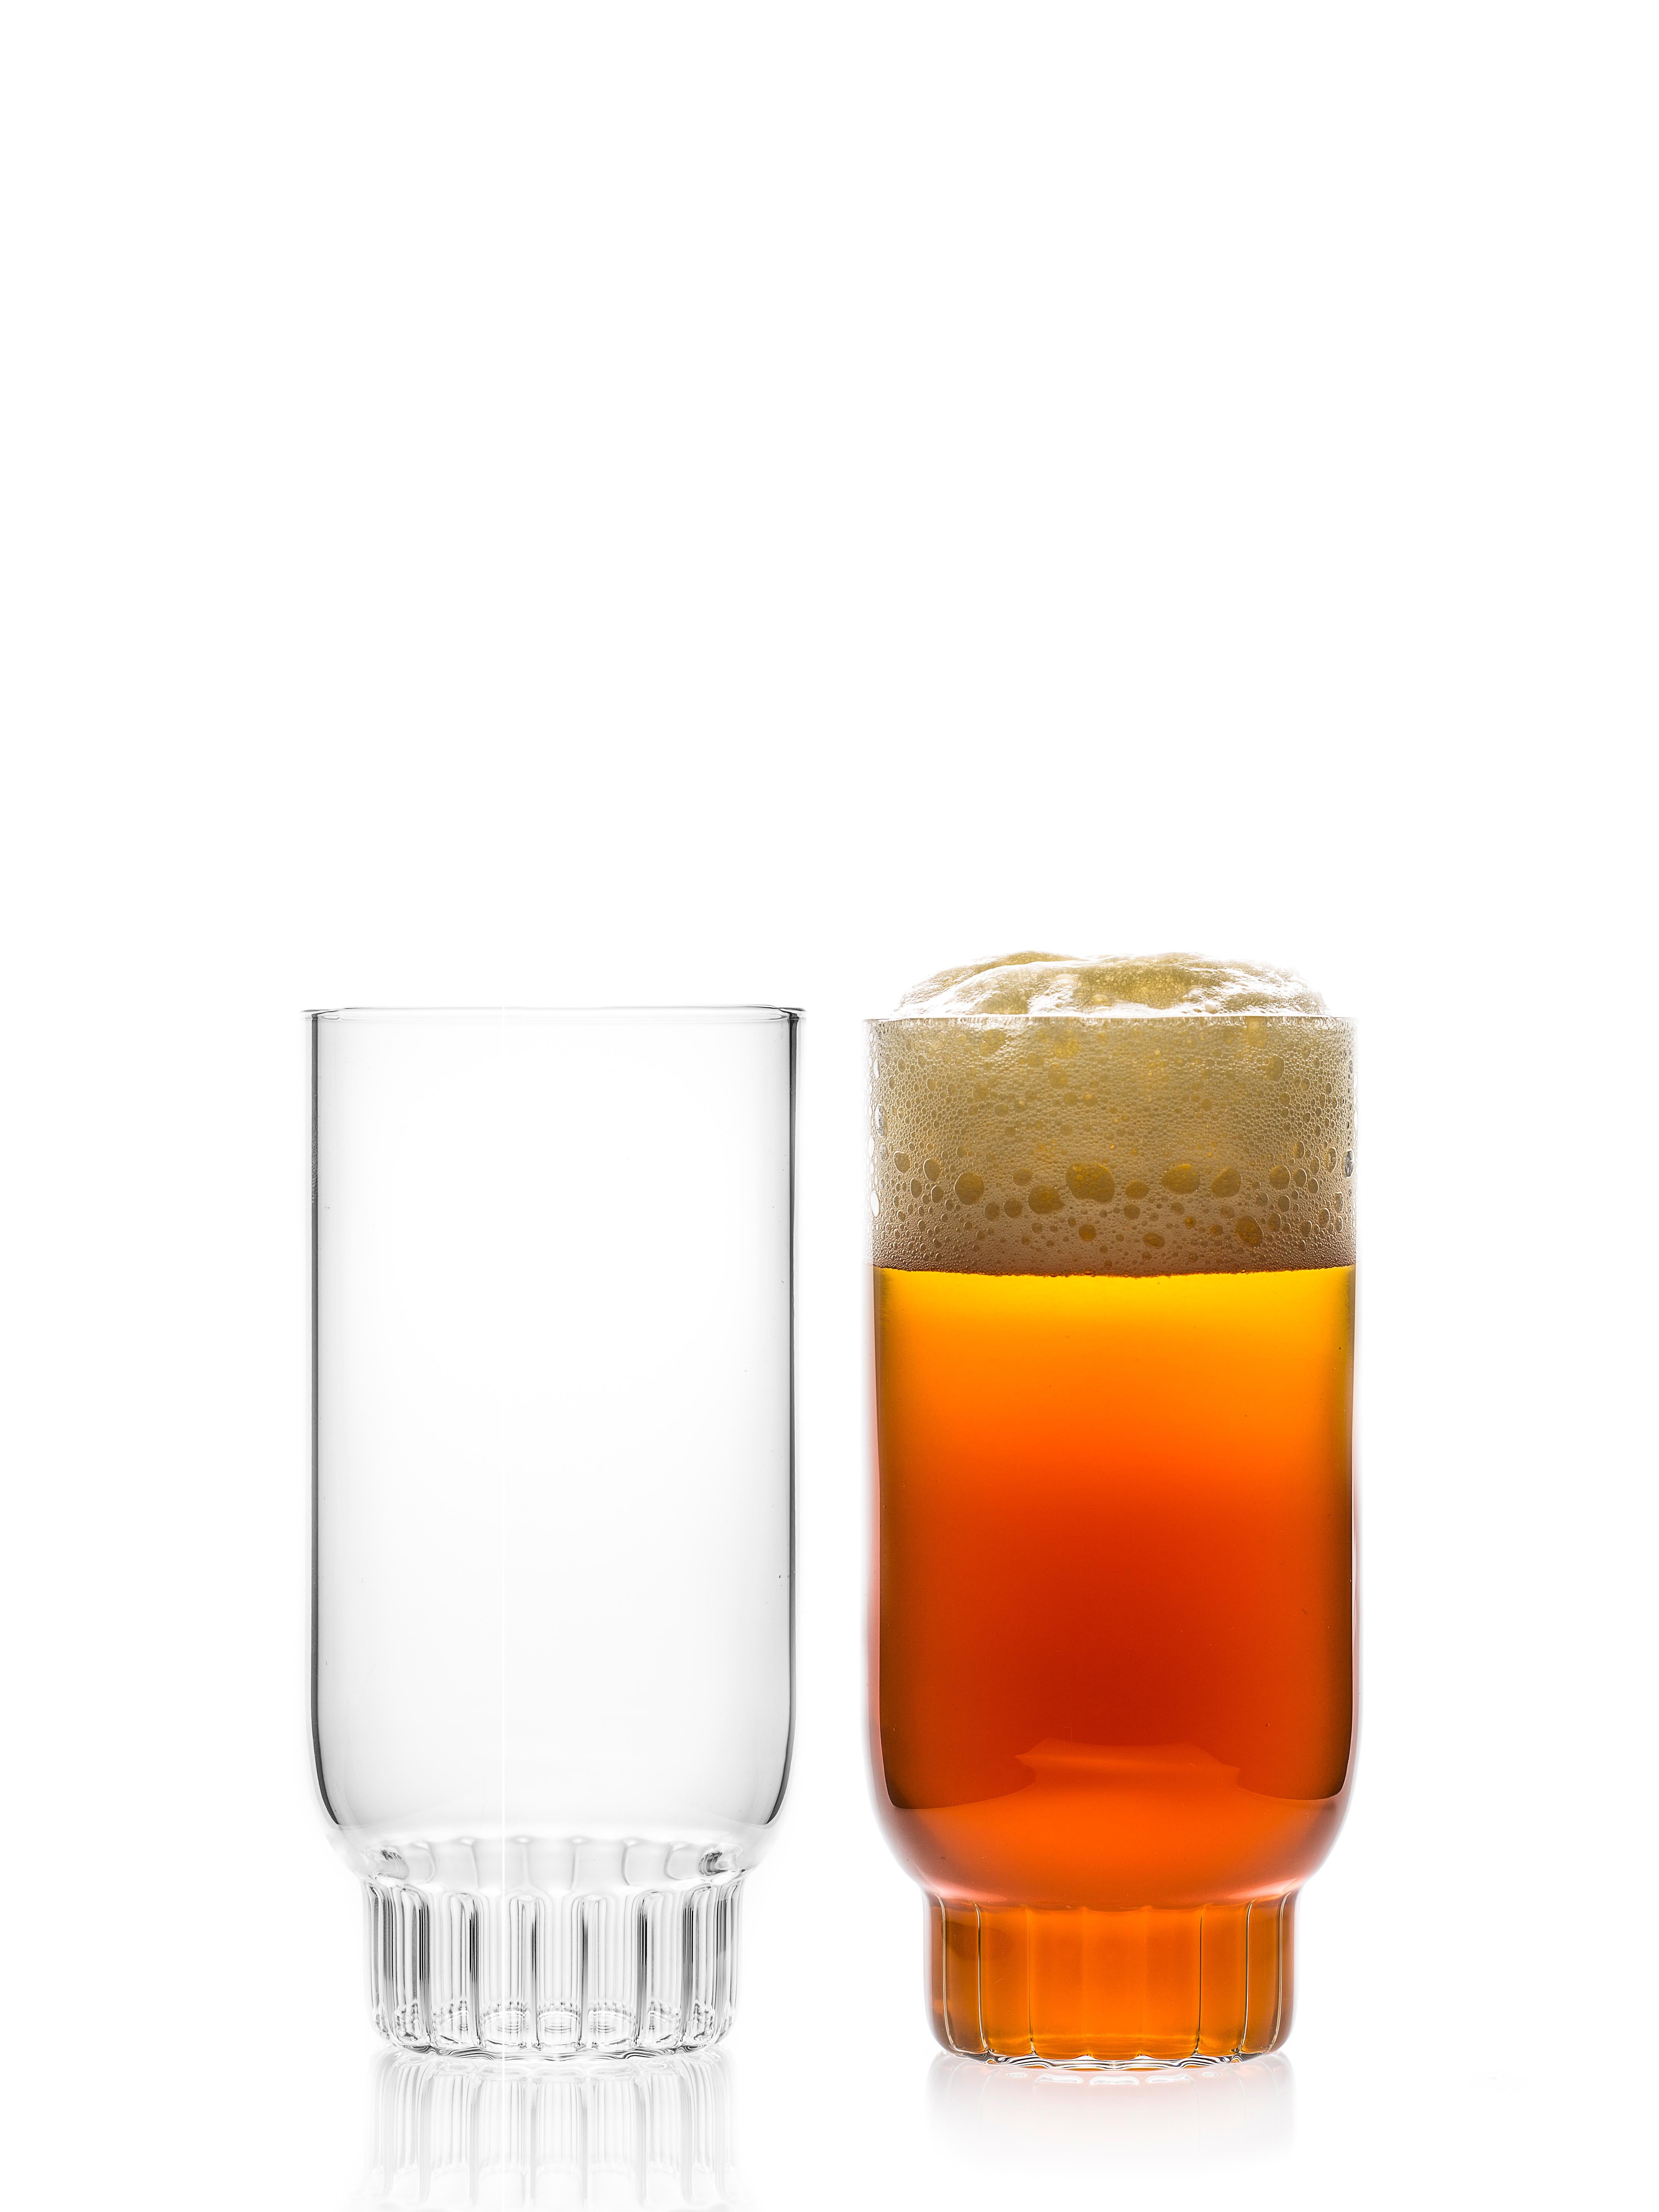 Rasori large highball glasses - set of two.

As the designer's favorite street in Milan, her home away from home, the clear Czech contemporary Rasori Large glasses are a playful and delicate combination of materials and form, just like the city